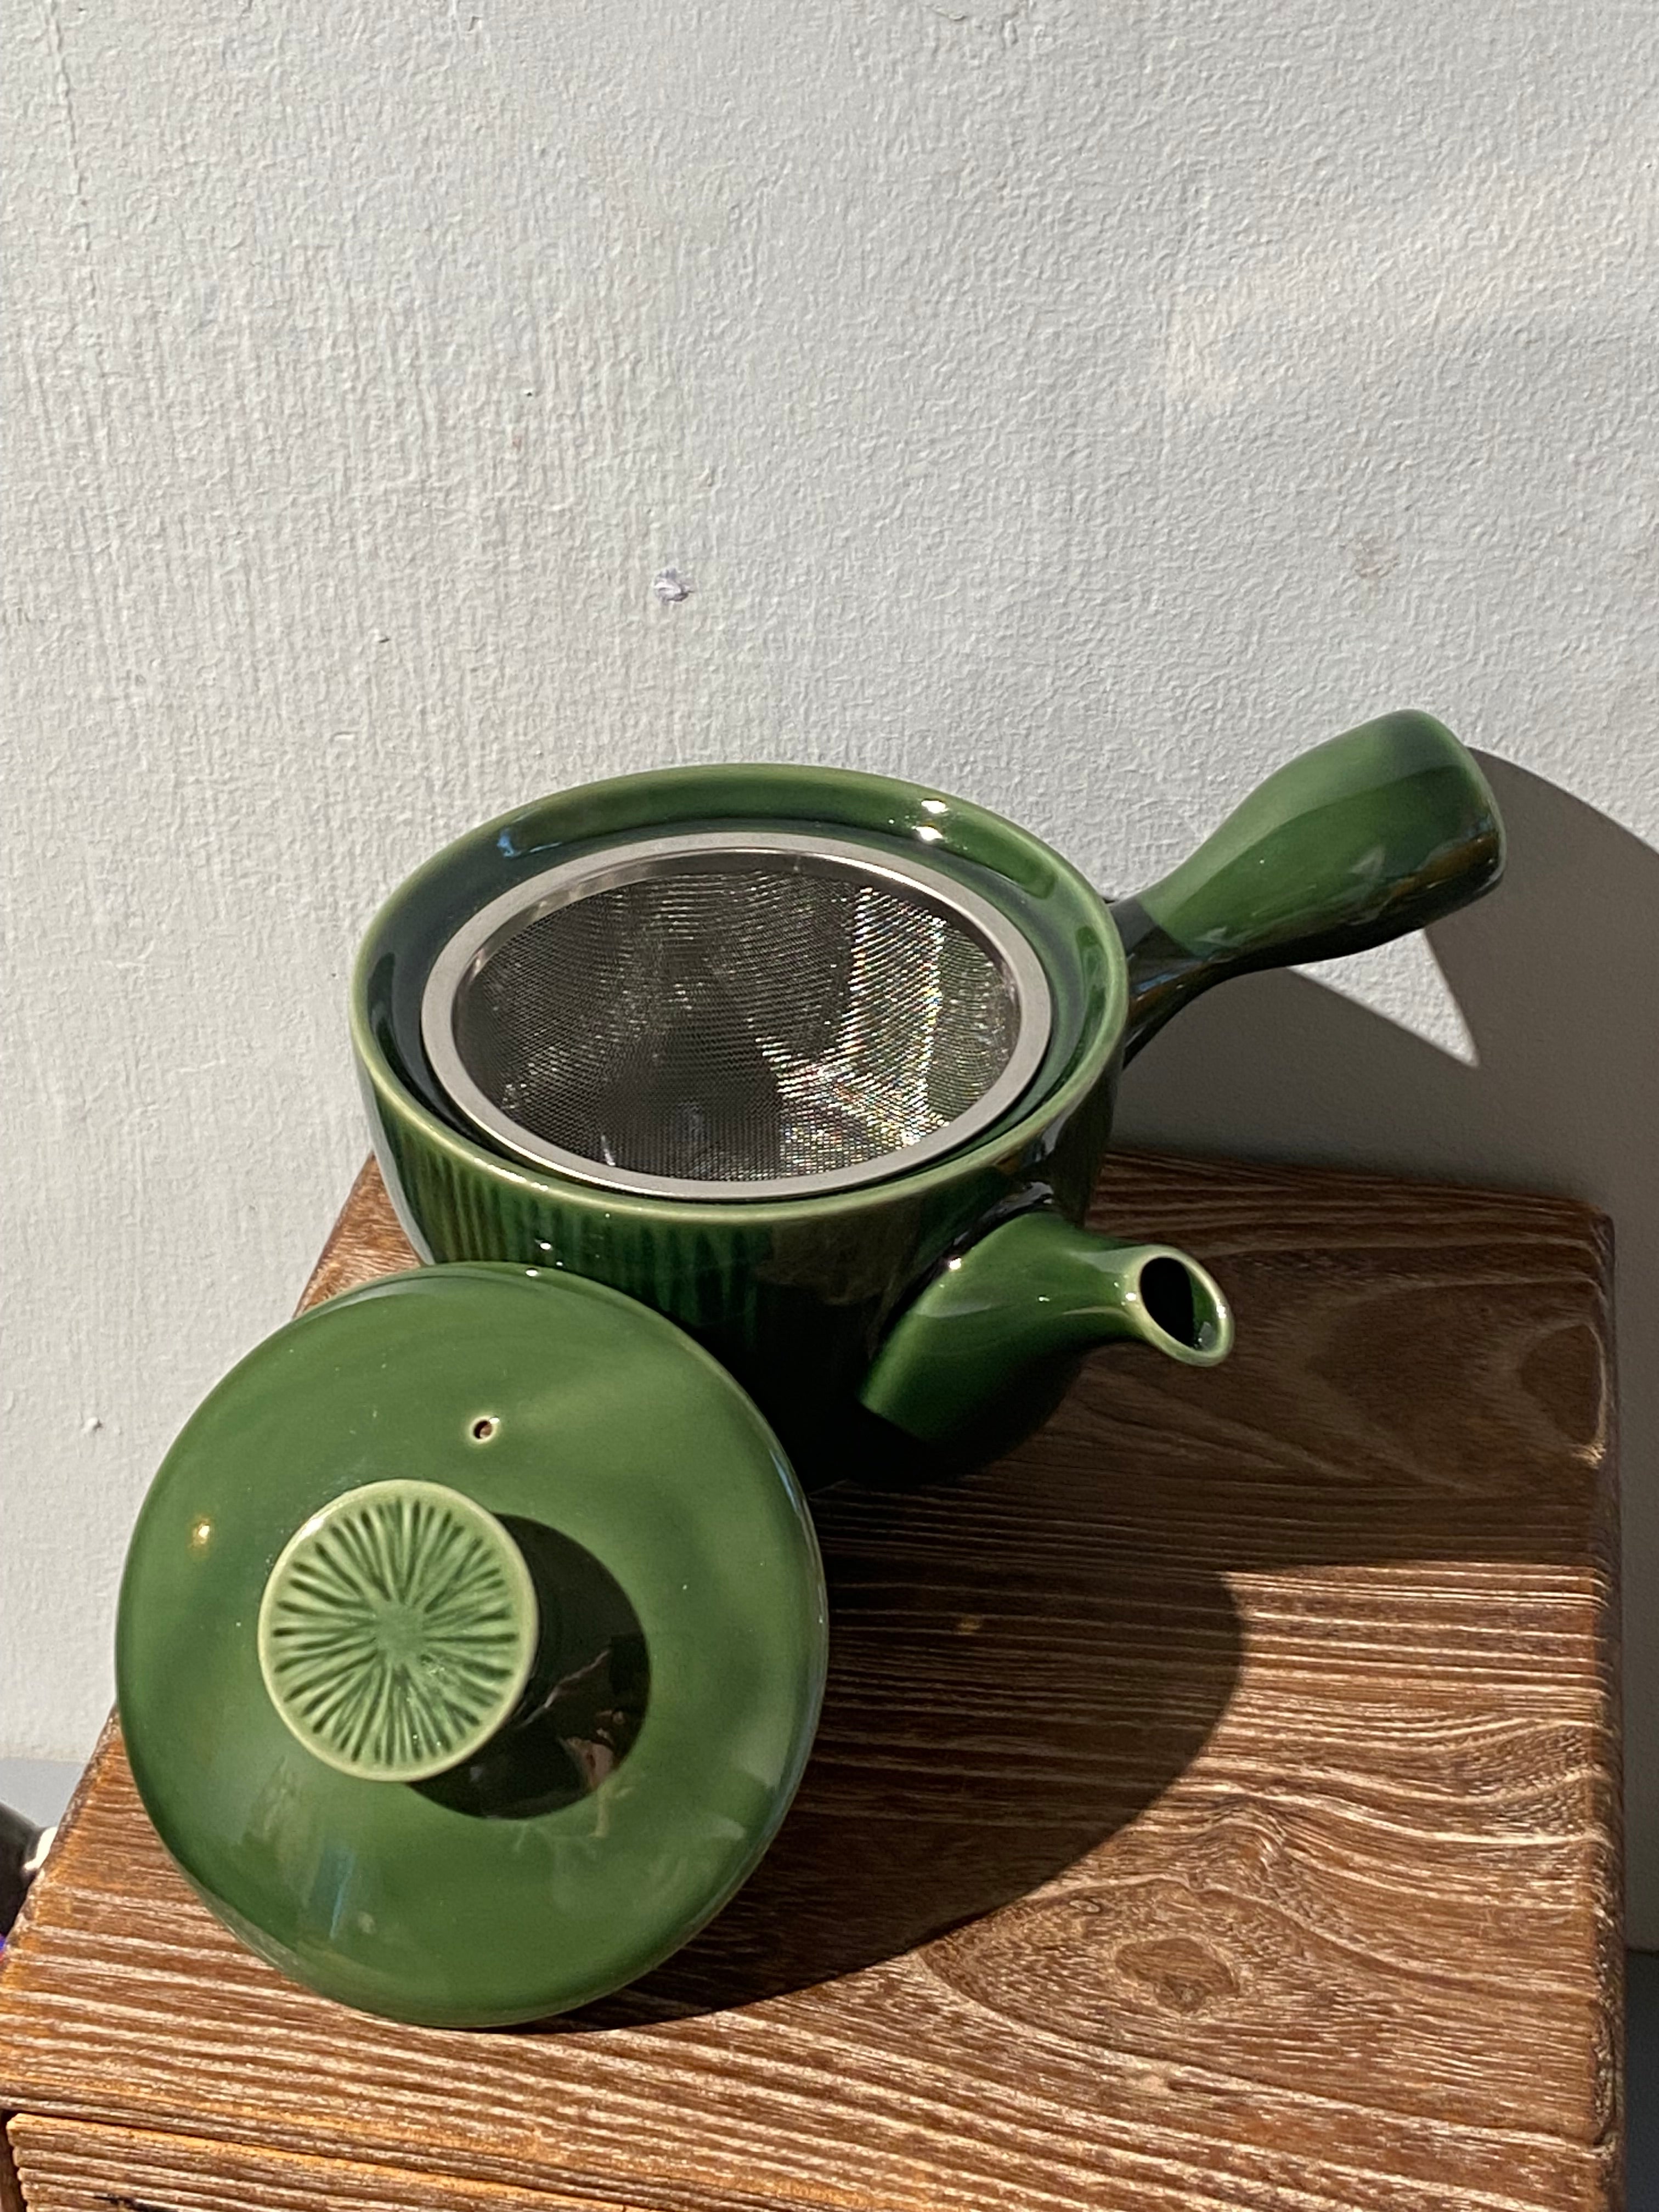 Glossy green teapot with handle